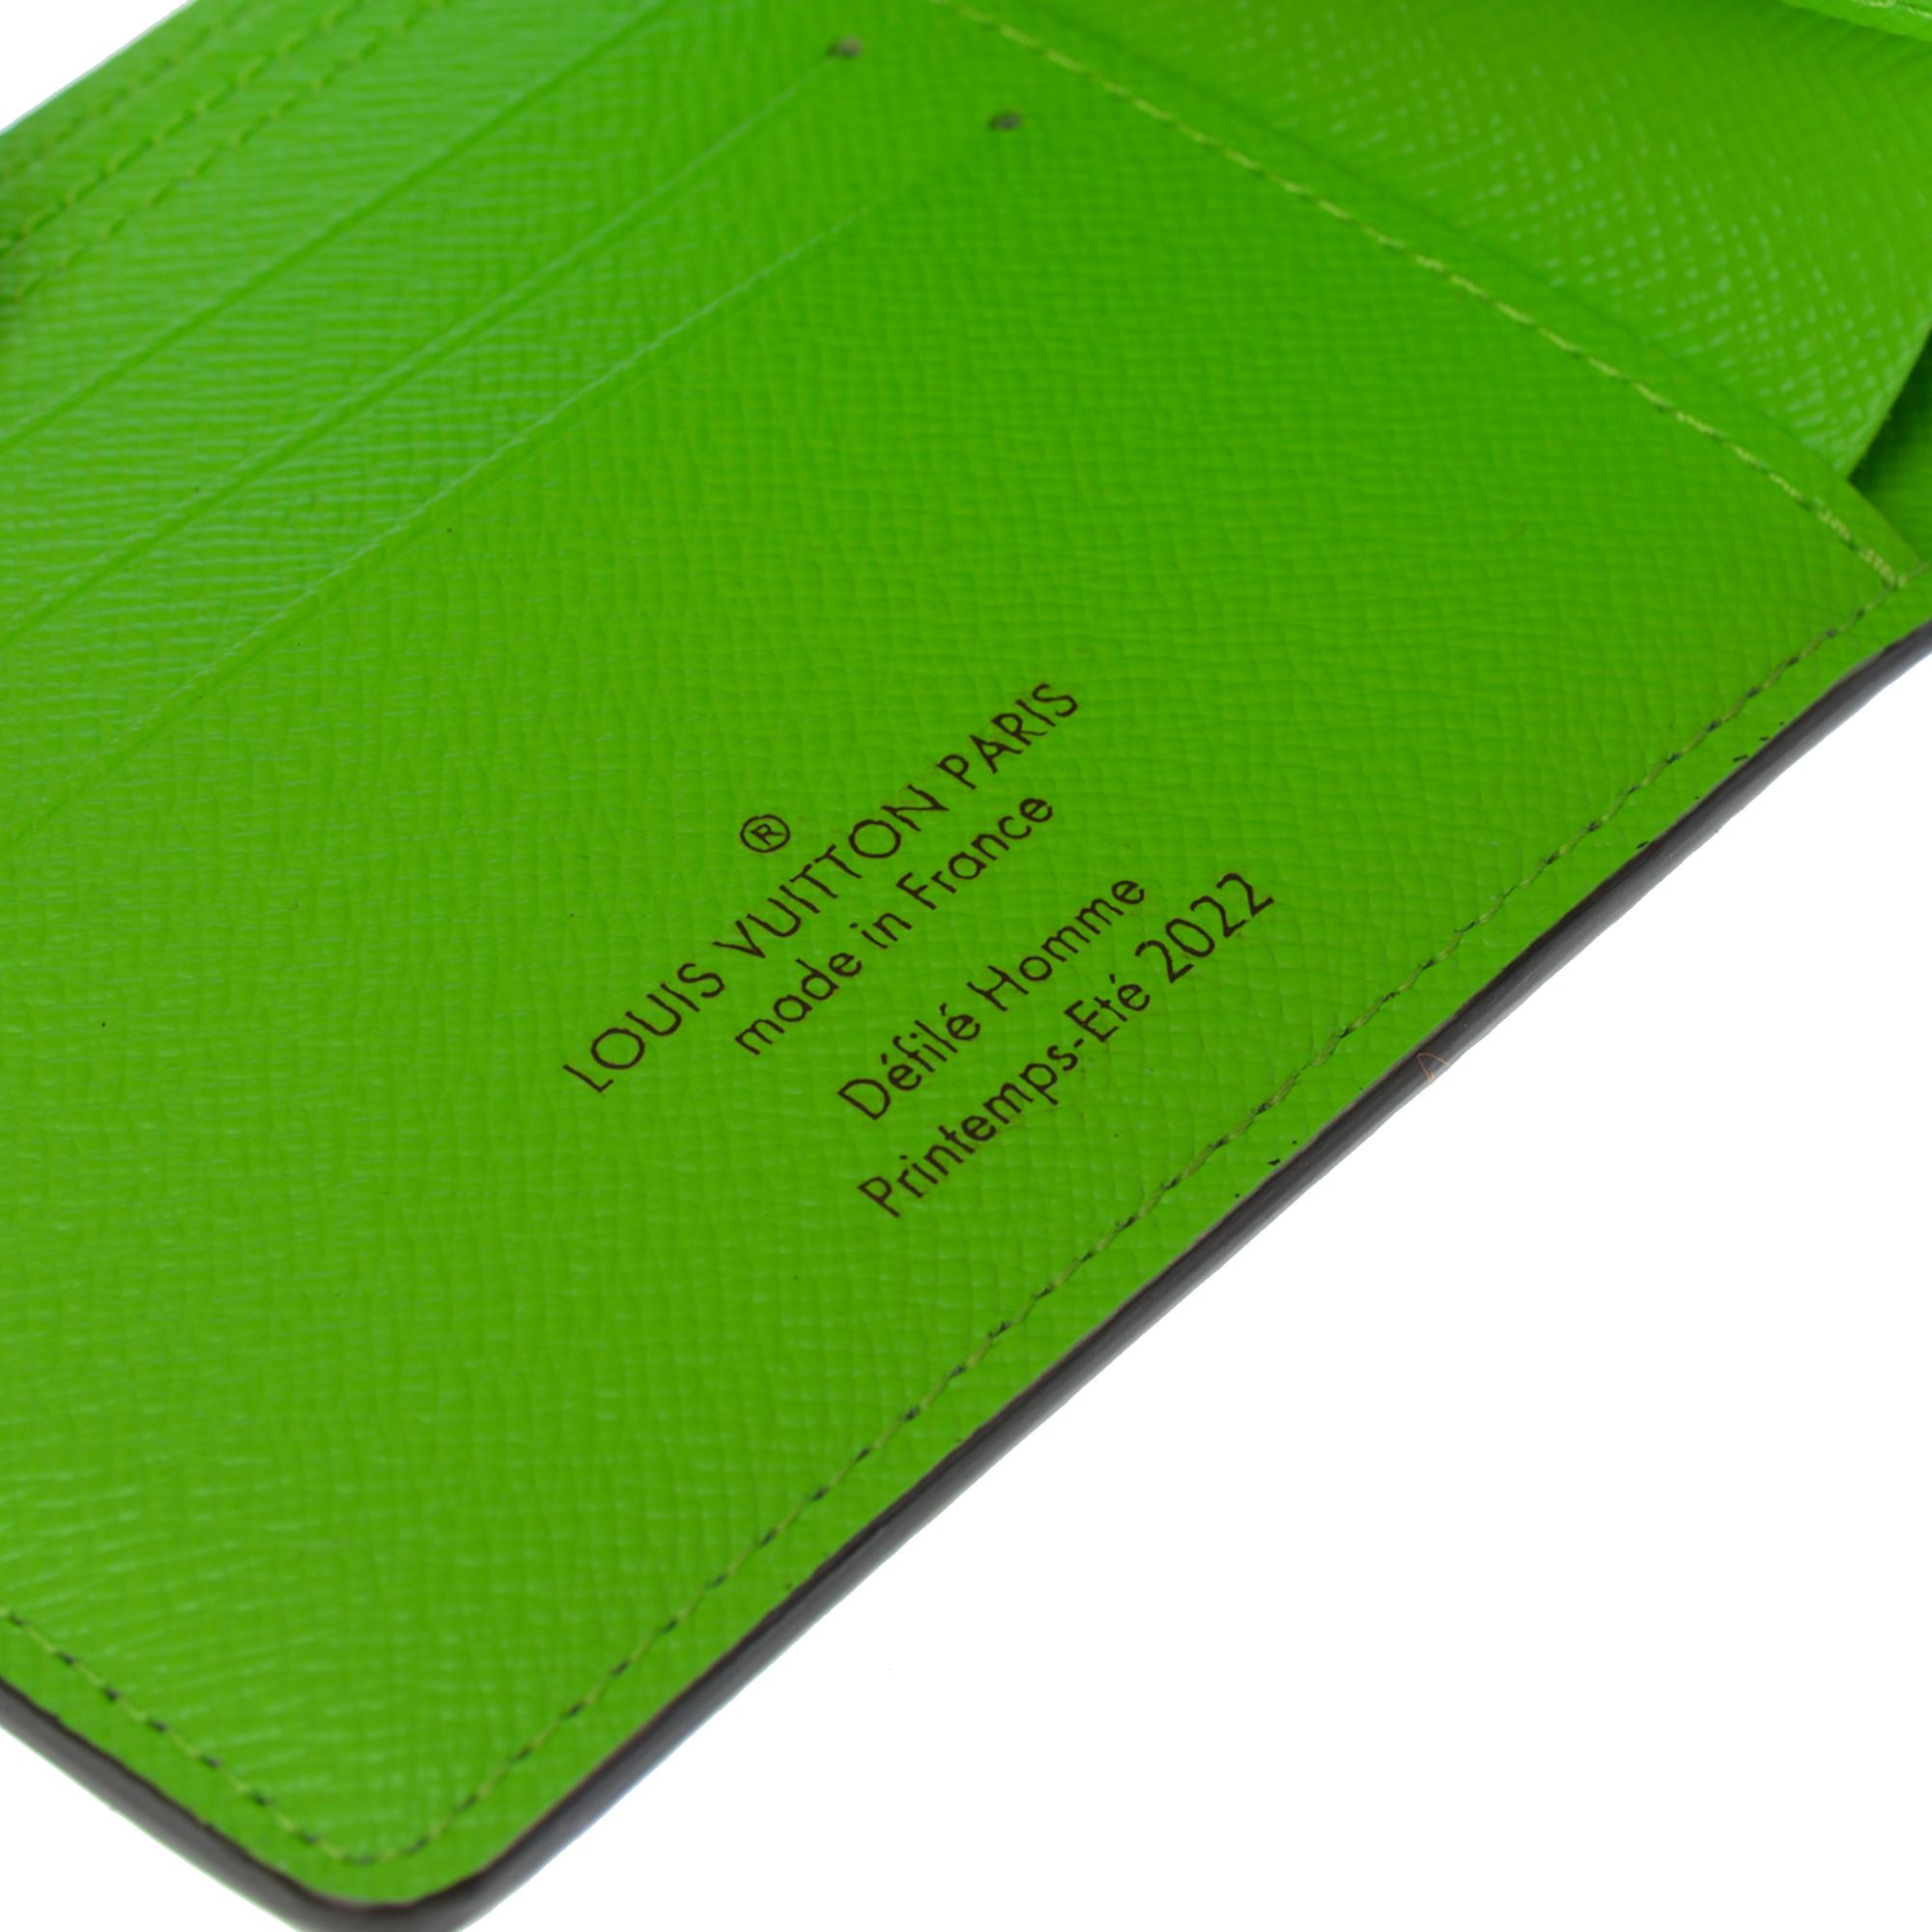 Orange New-Virgil Abloh FW 2022-Multiple Wallet N°7 in brown canvas an green leather